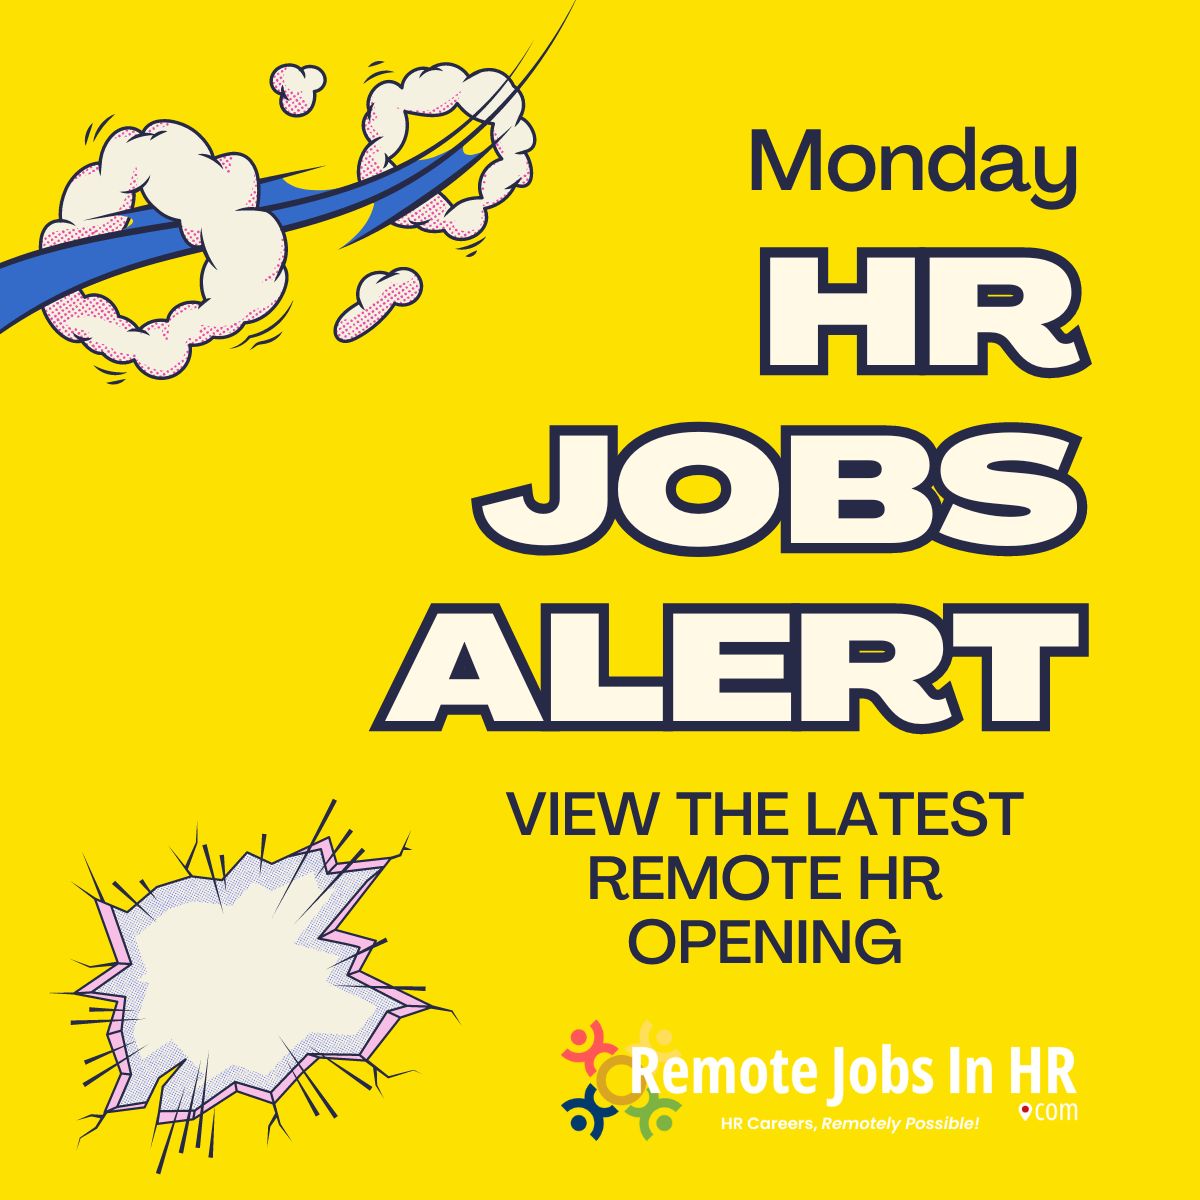 🎁 HR Jobs Alert 🎯 May 6, 2024
Click ➡️ buff.ly/3xUjij to view the latest jobs @ Remote Jobs In HR.

#WFH #Remote #JobAlert #Hiring #HiringAlert #HiringNow #HR #HRJobs #HumanResources #JobListing #Jobs #JobSeekers #Careers #JobOpening #Employment #Homeoffice #Hybrid